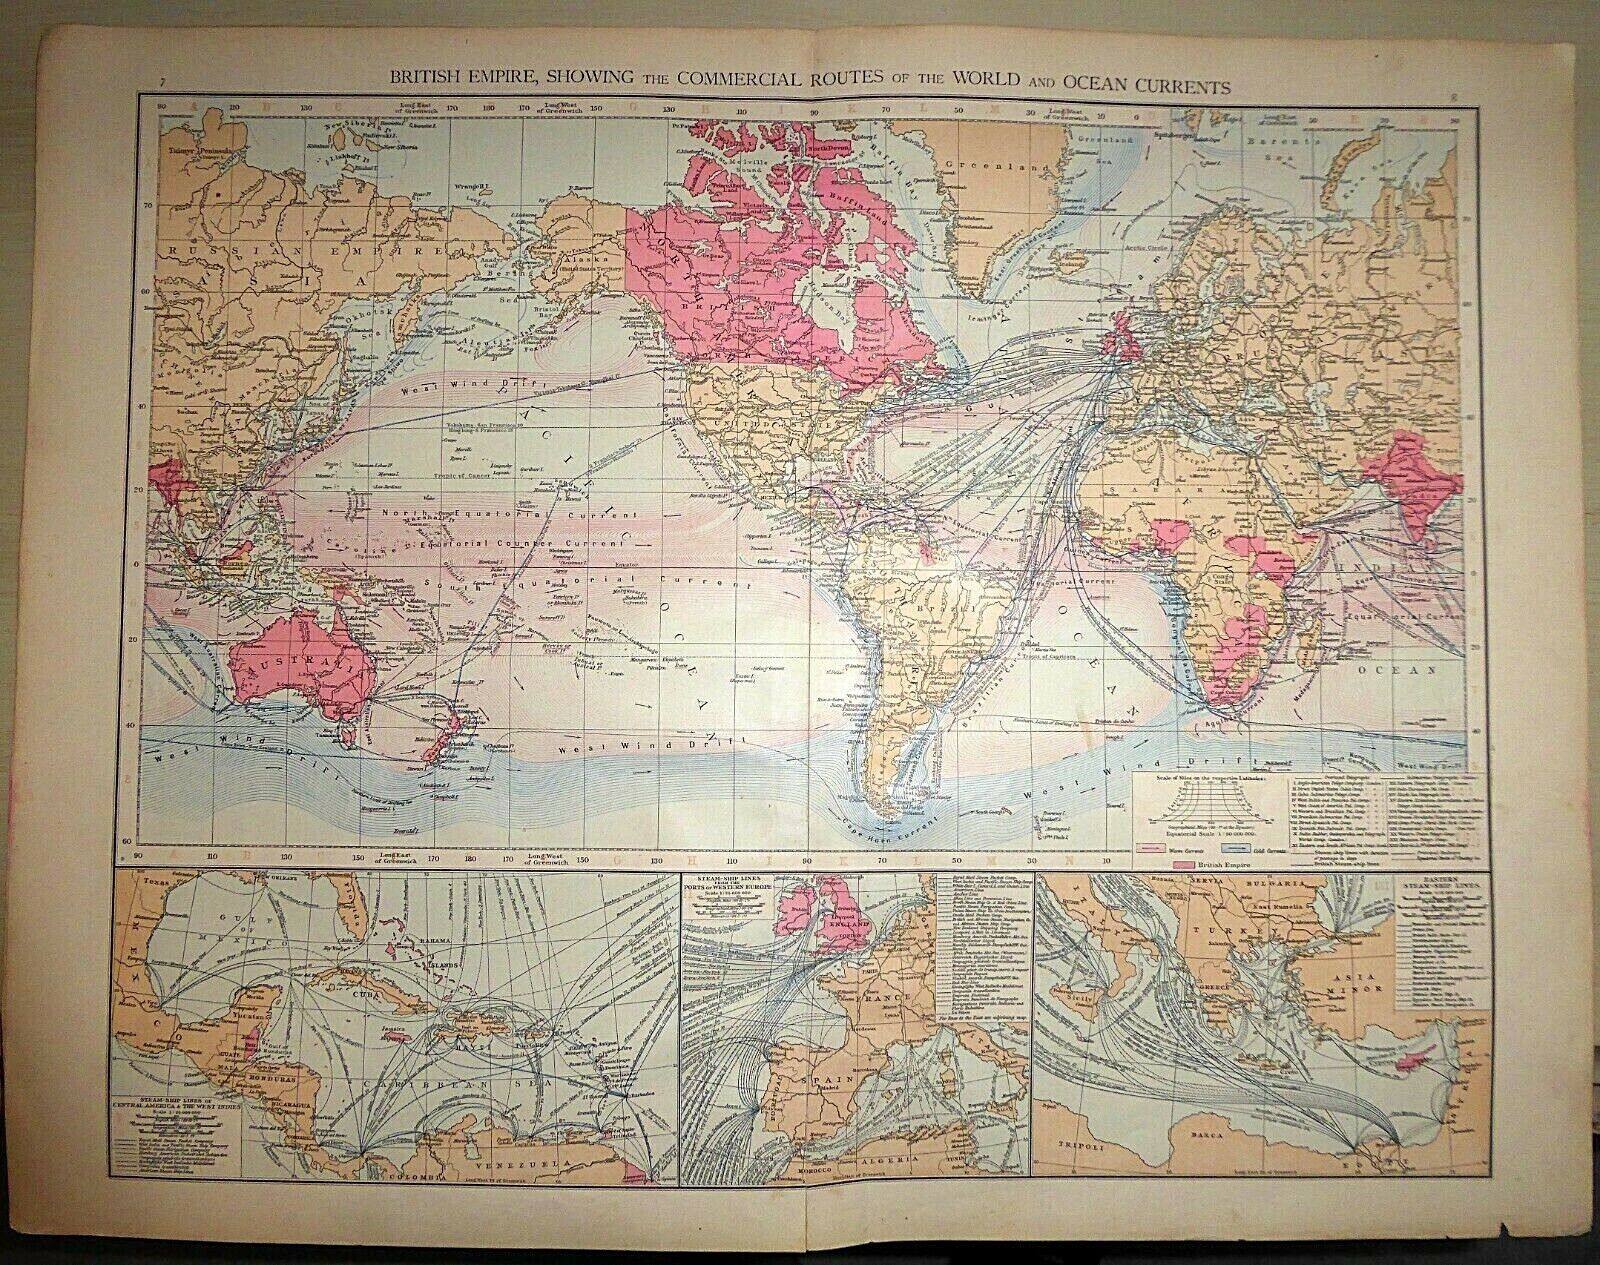 1896 British Empire Map - Commercial Routes/Ocean Currents (no join) 53cm x 41cm